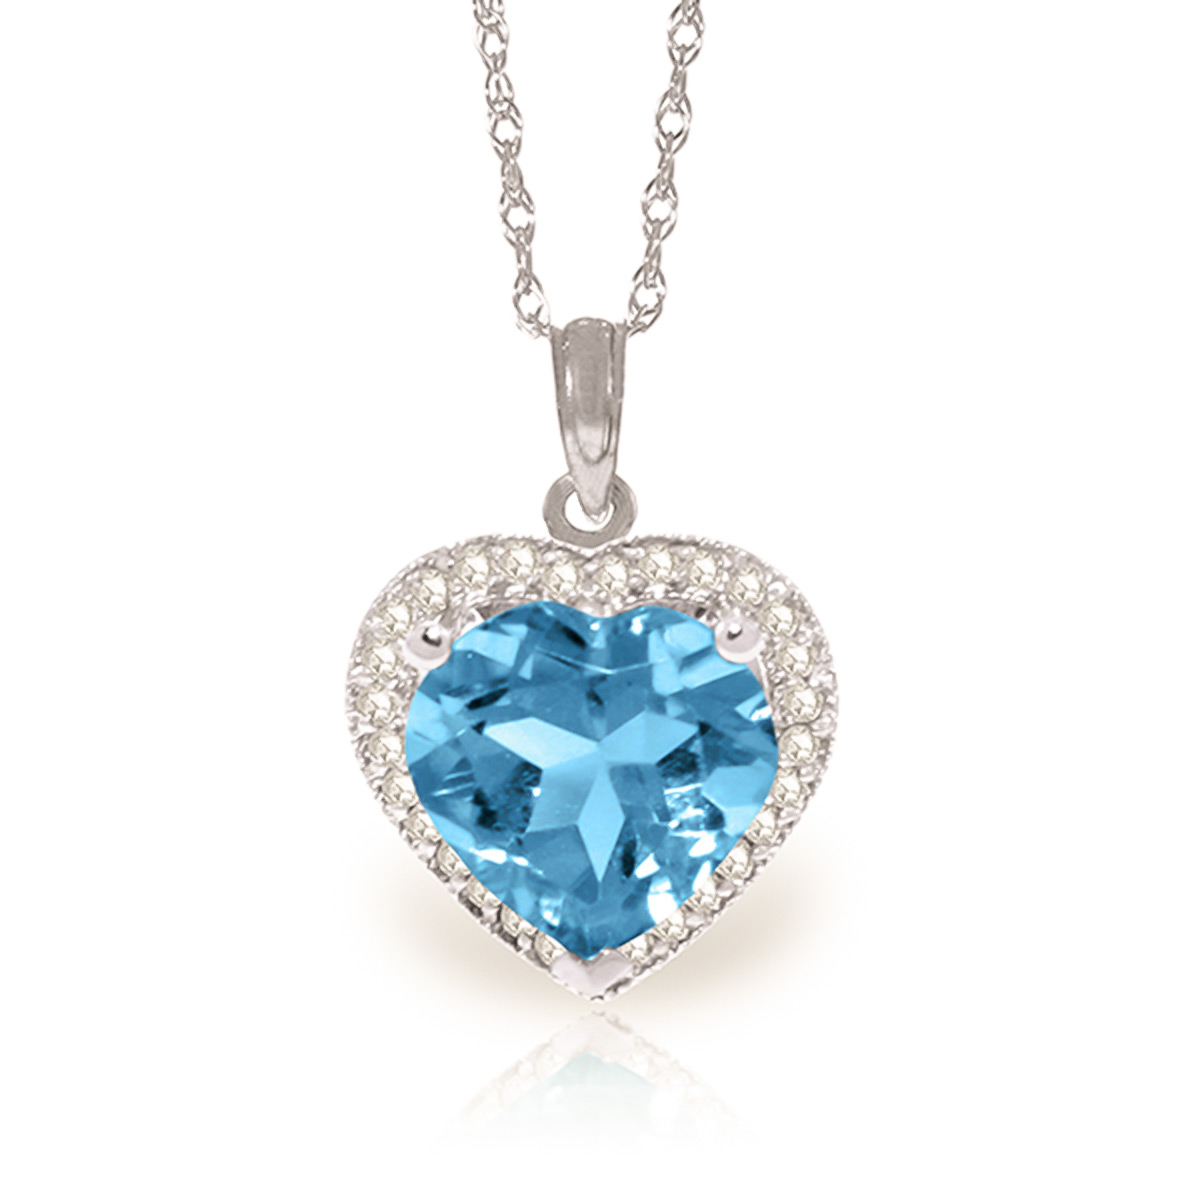 Blue Topaz Halo Pendant Necklace 6.44 ctw in 9ct White Gold